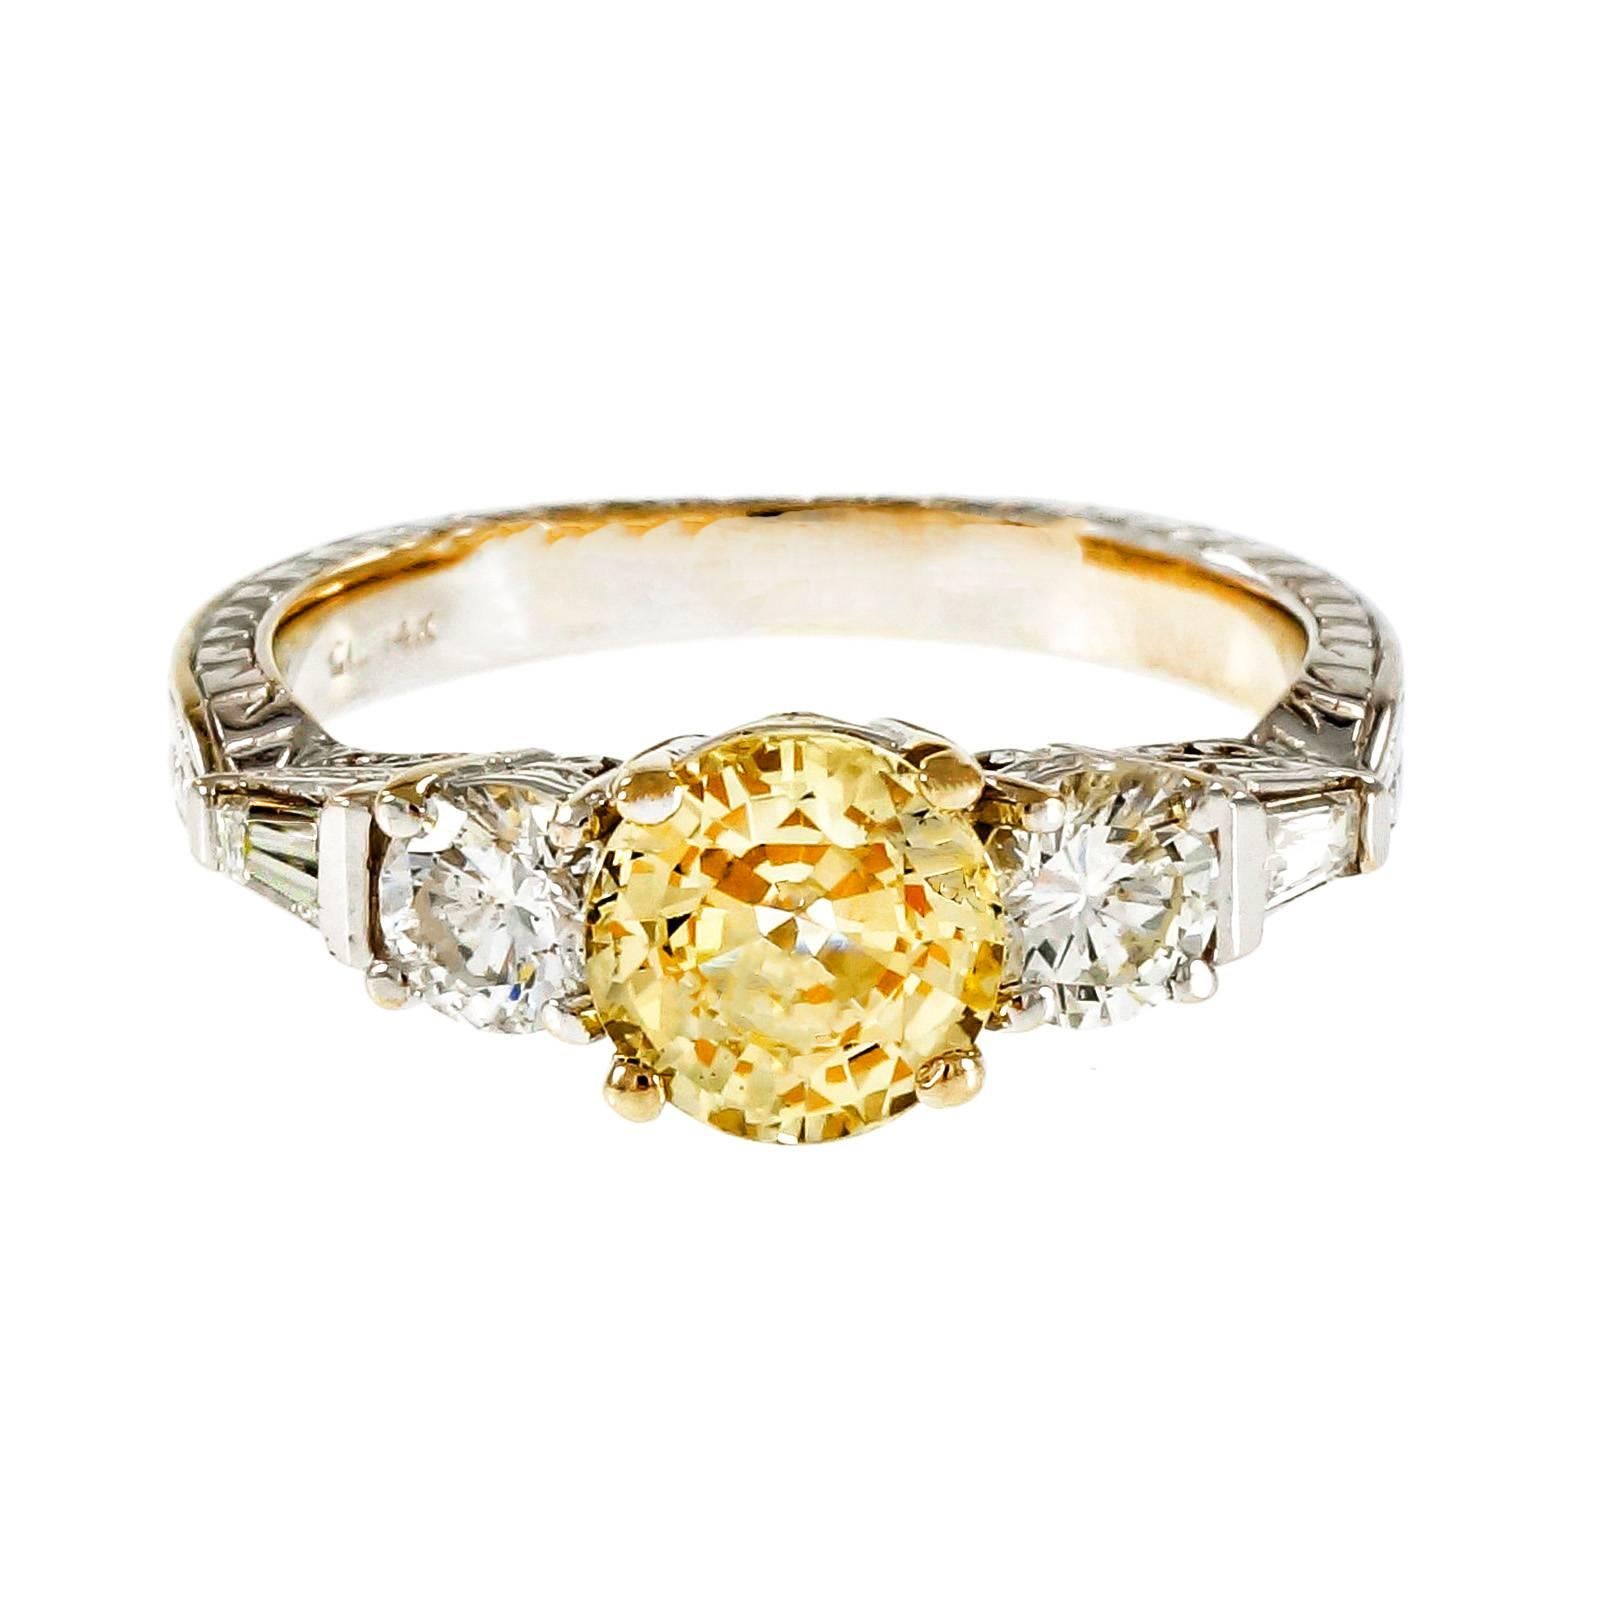 Natural no heat light yellow Sapphire engagement ring. With an European cut and GIA certified sapphire in a 14k white gold engagement ring from Peter Suchy with round and baguette diamonds. 

1 round light yellow Sapphire, approx. total weight